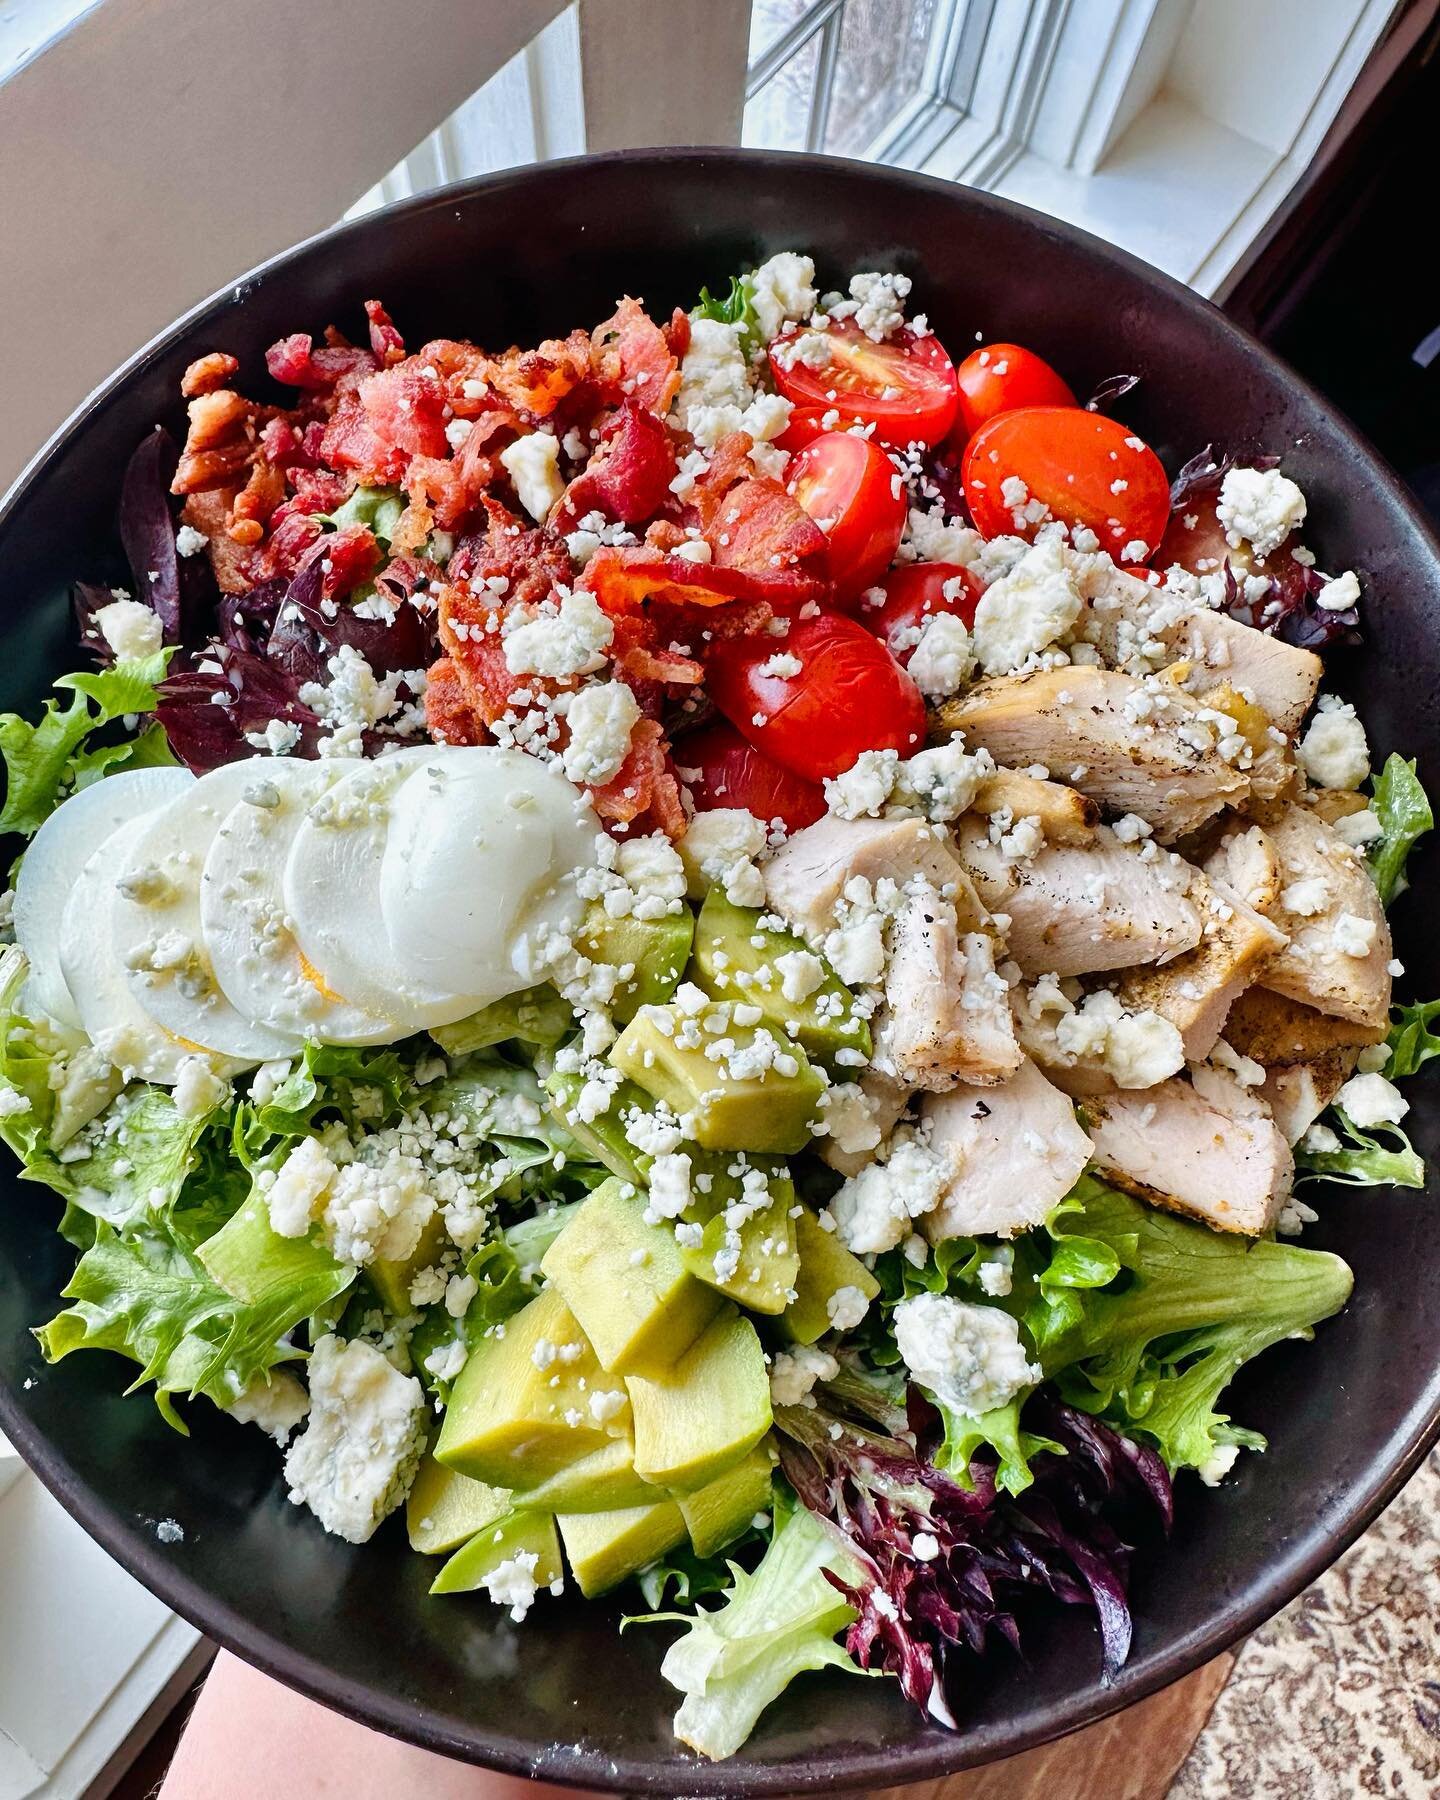 Today&rsquo;s Brunch Special! Delaney&rsquo;s Cobb Salad tossed in bleu cheese dressing topped with diced chicken, bacon bits, avocado, tomato, and a hard boiled egg.
&bull;
&bull;
&bull;
&bull;
Seats are still available! Stop by and try this special